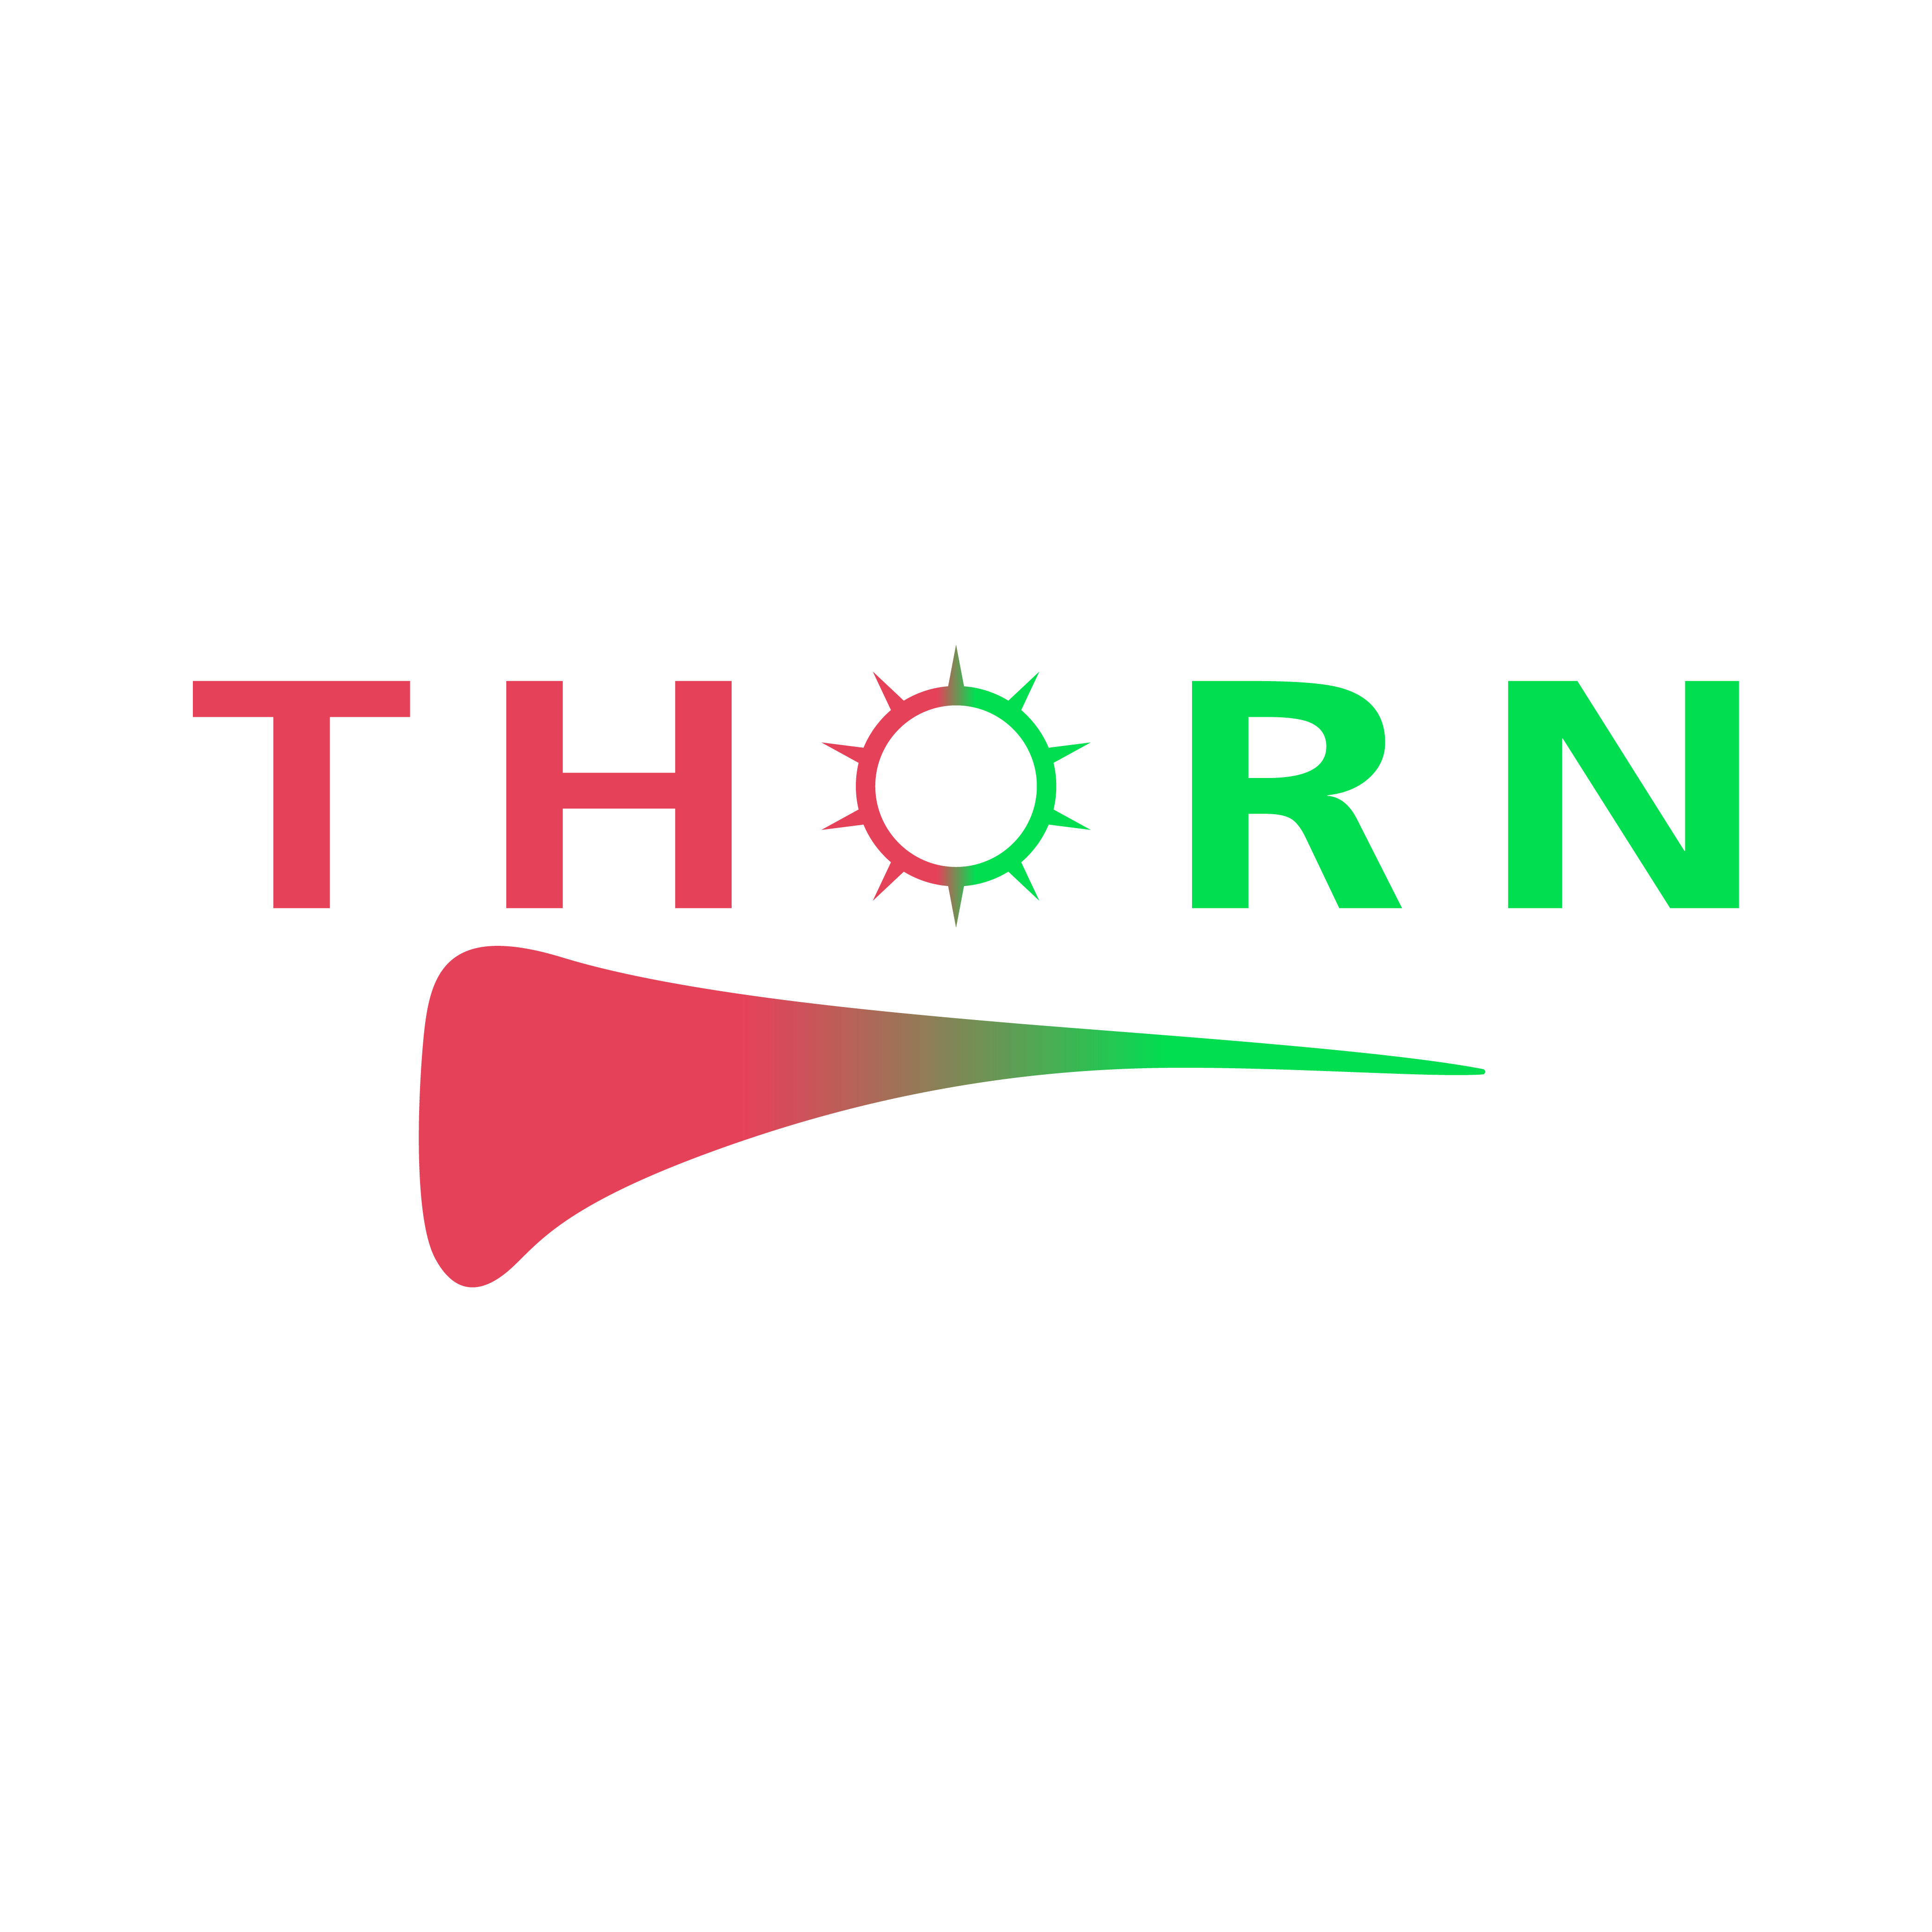 Contact Thorn Services